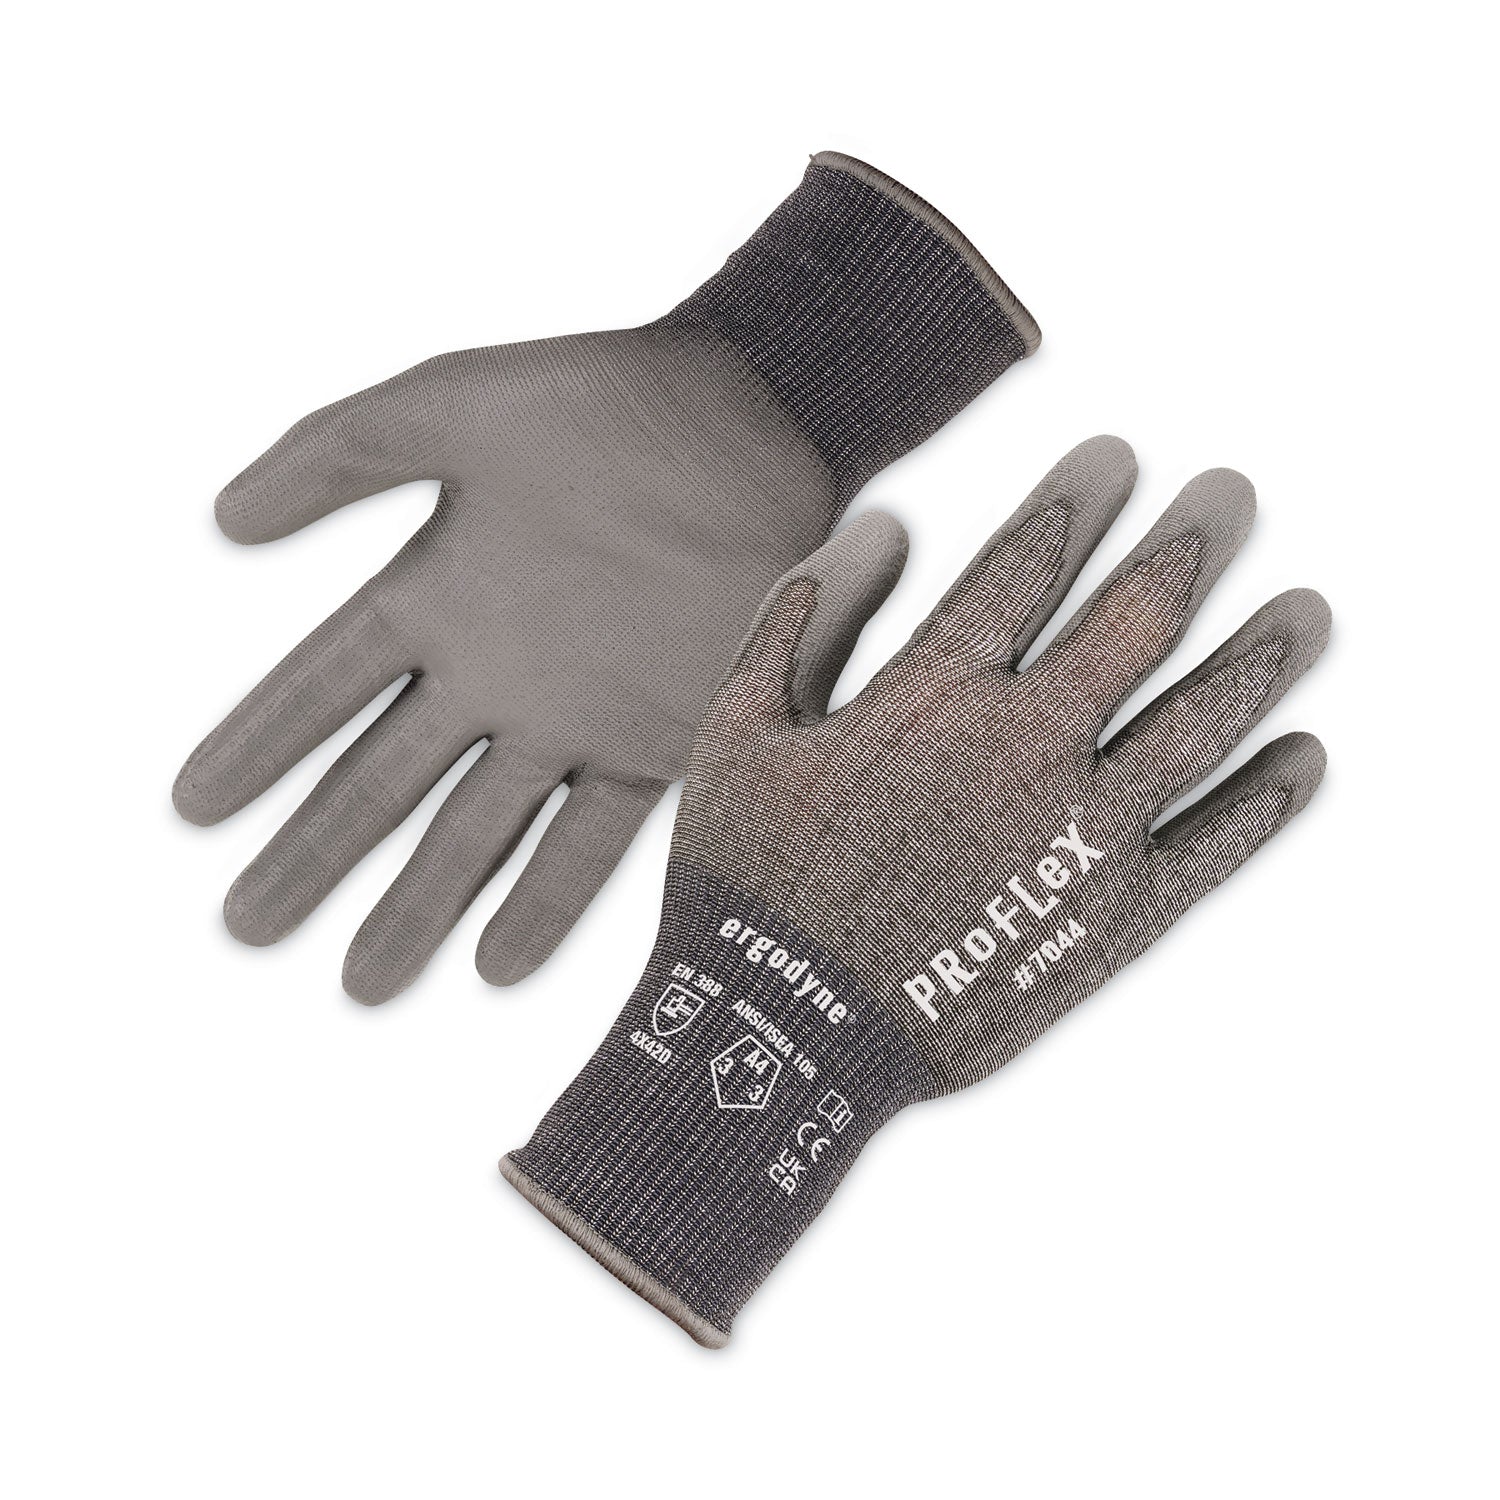 proflex-7044-ansi-a4-pu-coated-cr-gloves-gray-small-12-pairs-pack-ships-in-1-3-business-days_ego10482 - 1